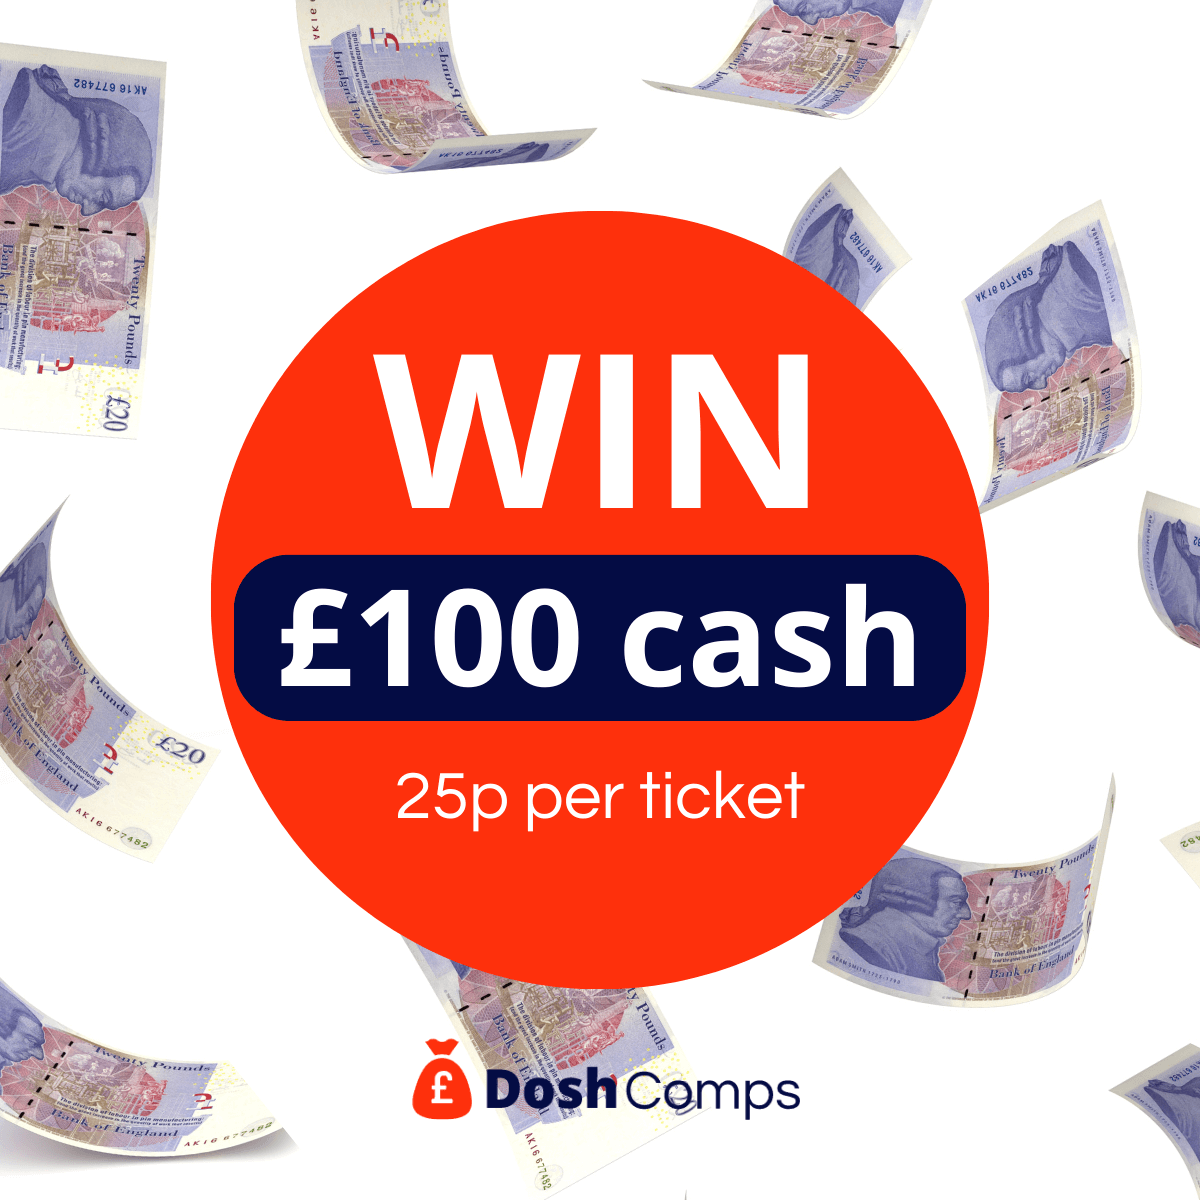 Win £100 for just 25p! 😀 Get in early. 👍 Tickets at 👉 doshcomps.co.uk #prizes #prizesuk #prizedraw #prizewinner #prizegiveway #winners #competitionuk #prizesuk #win #doshcomps